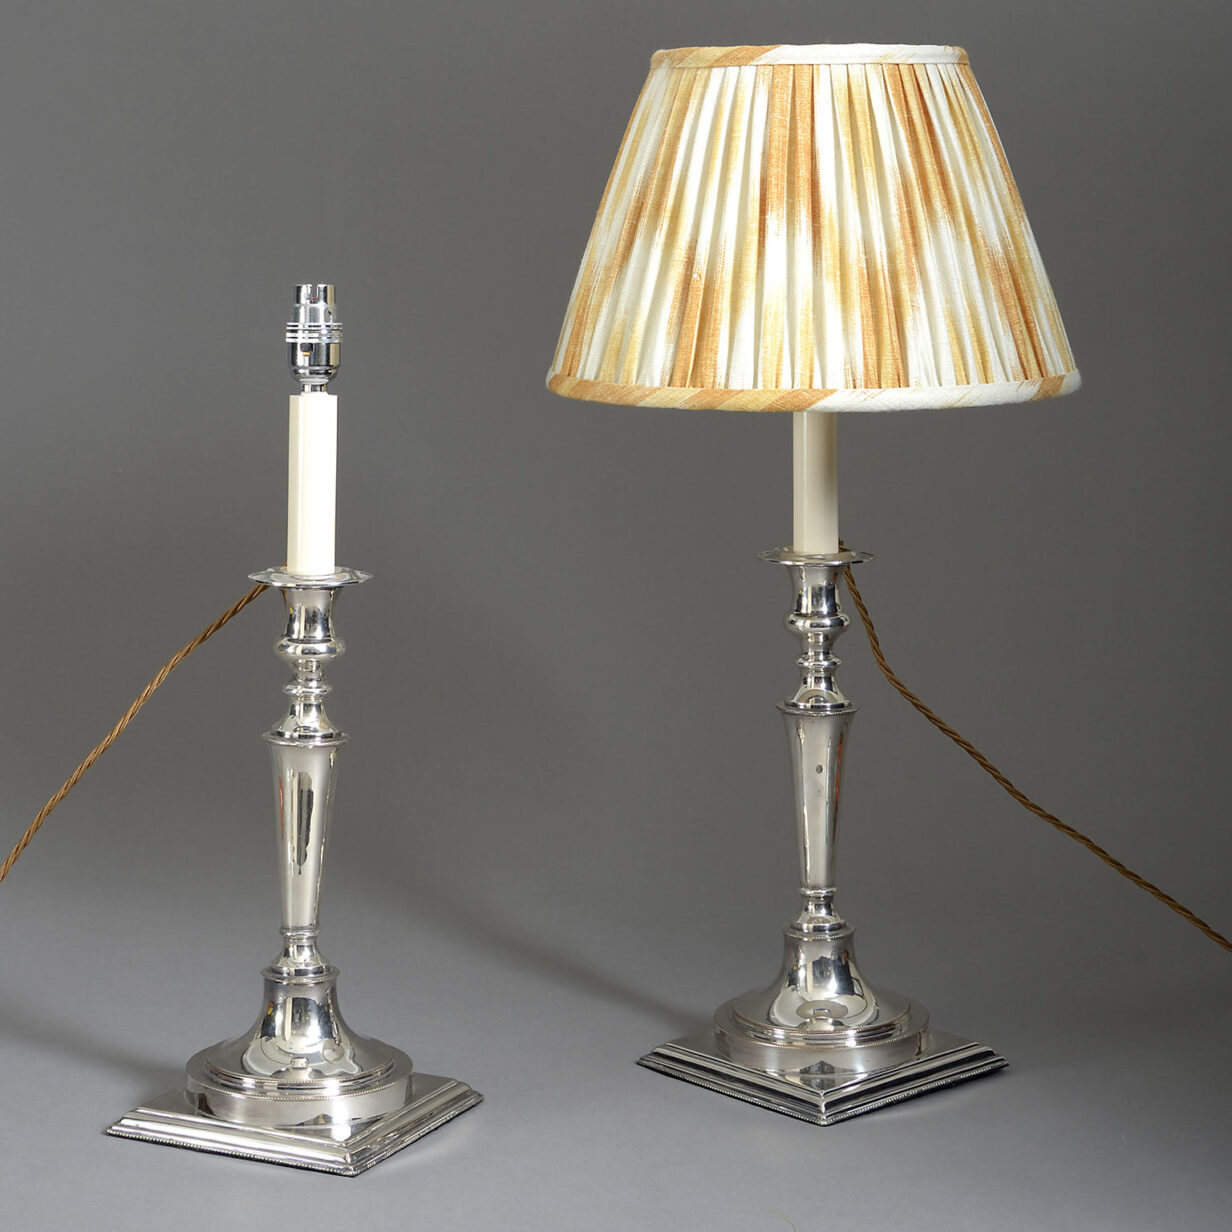 Pair of silvered candlestick lamps